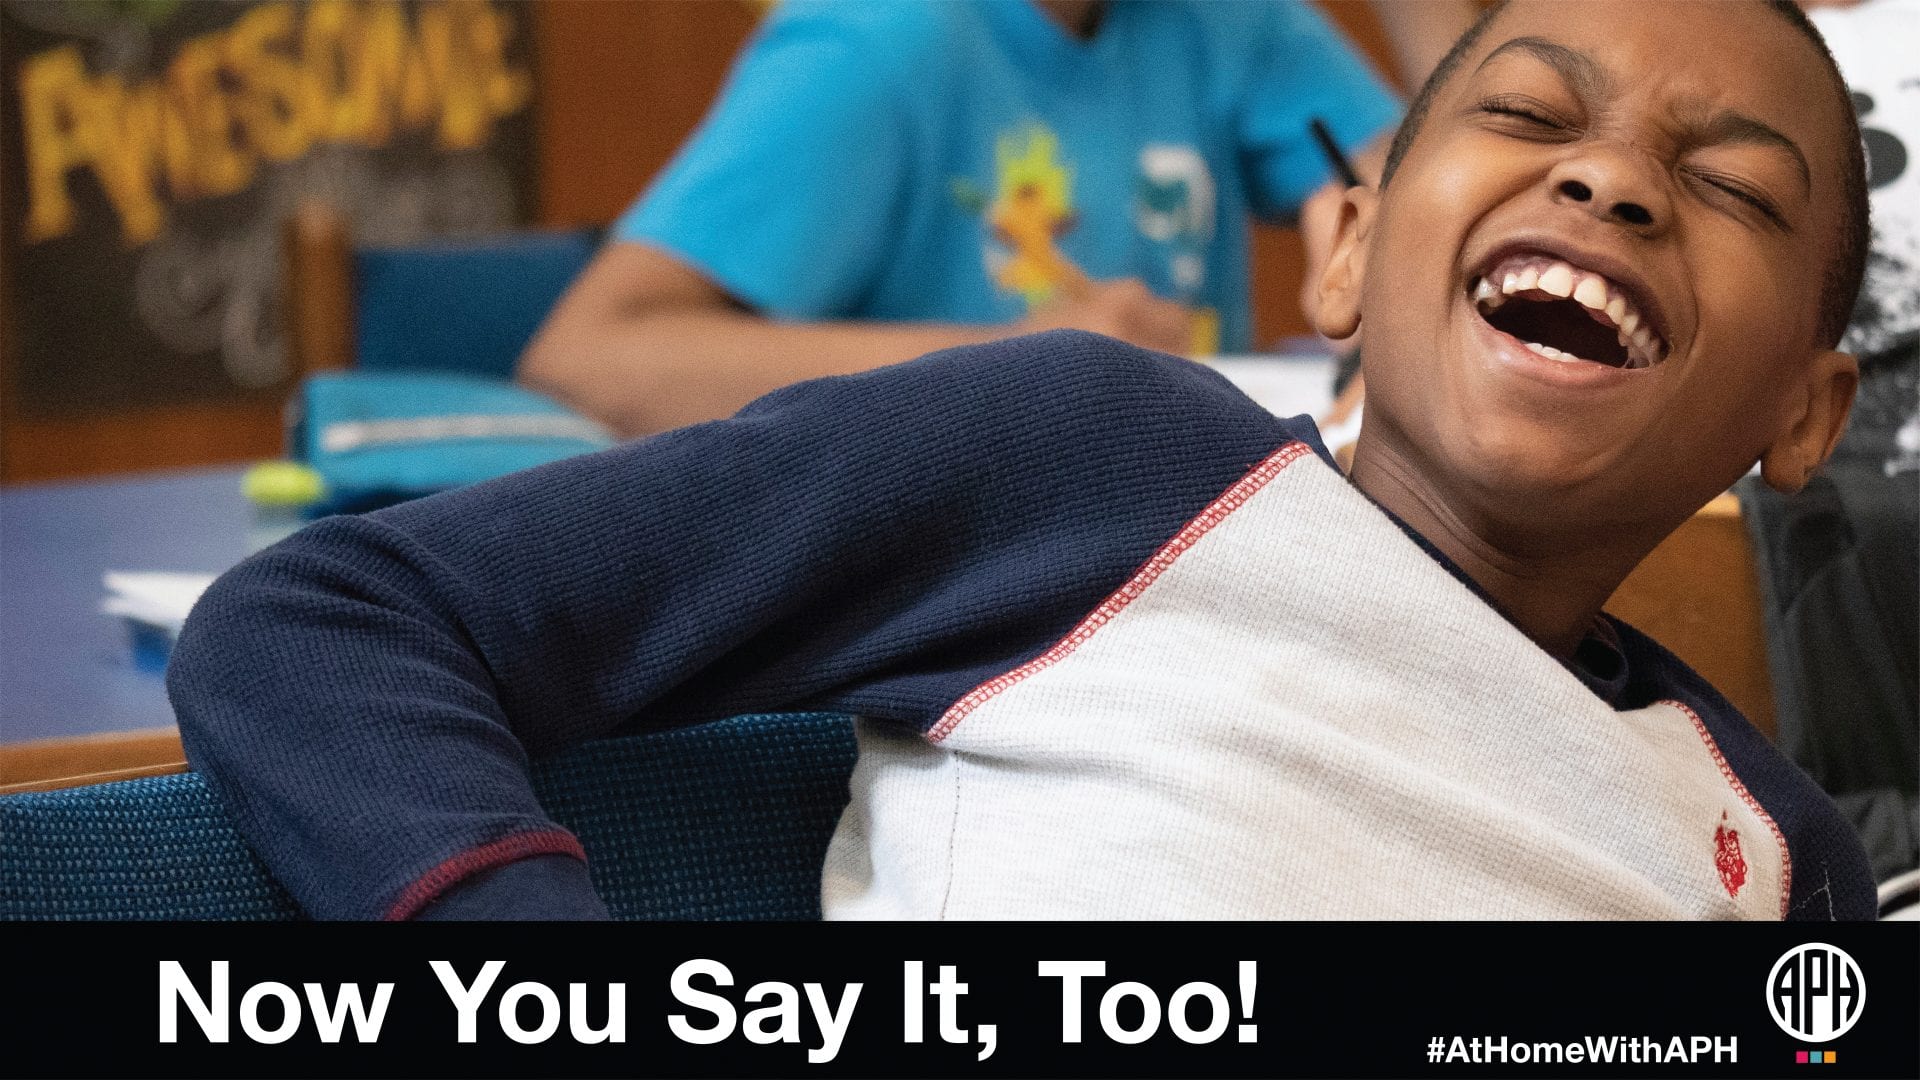 a boy laughing. text reads "now you say it, too! #AtHomeWithAPH"